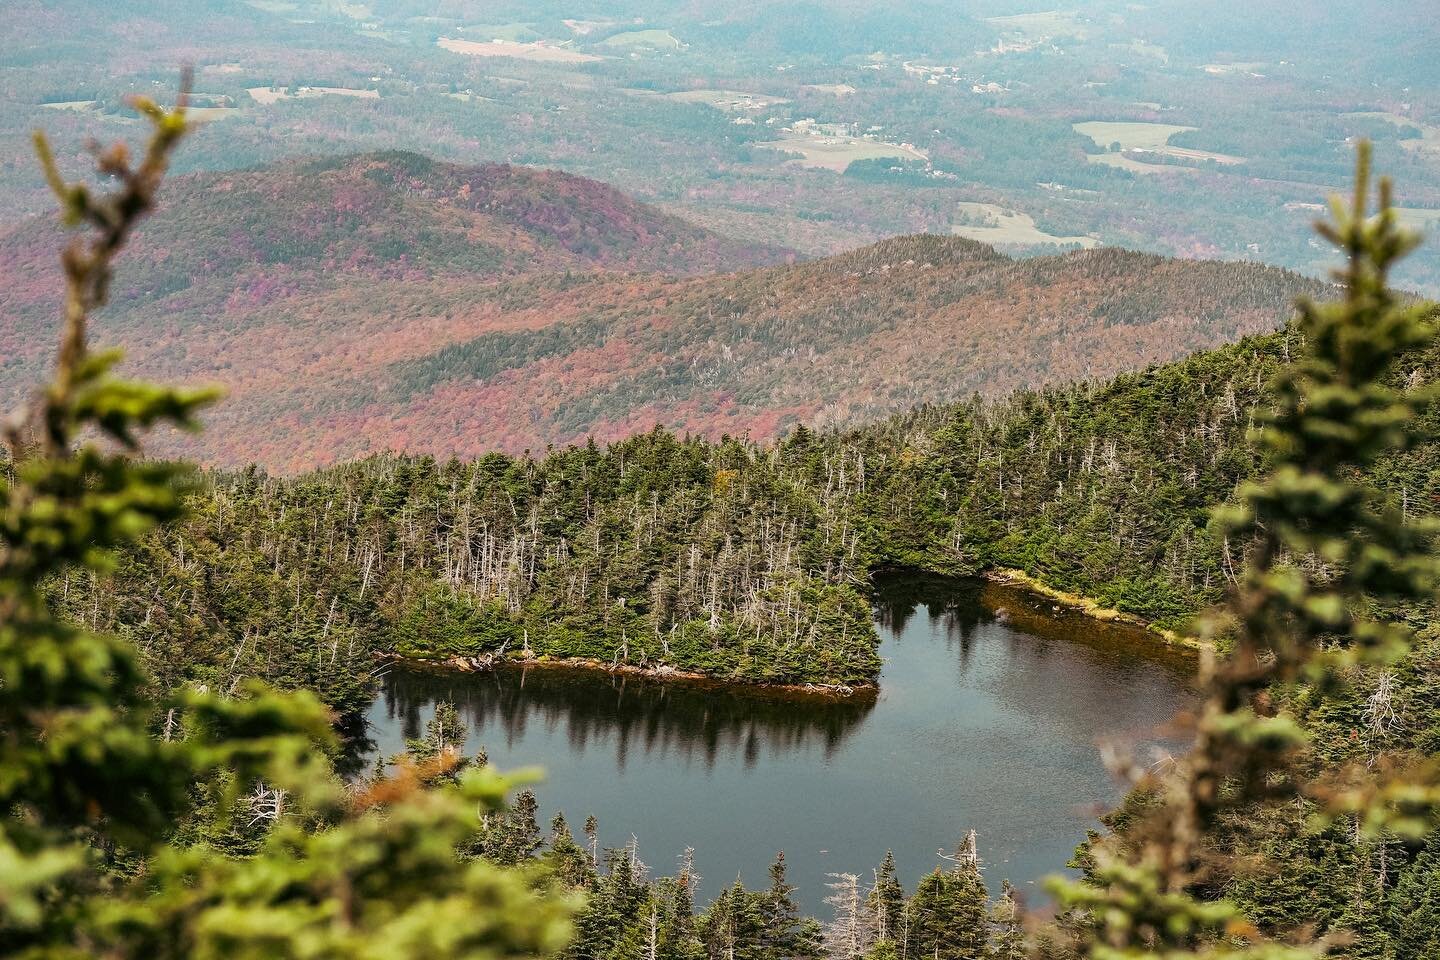 Lake of the Clouds. 

#hellbrooktrail #mtmansfield #vt